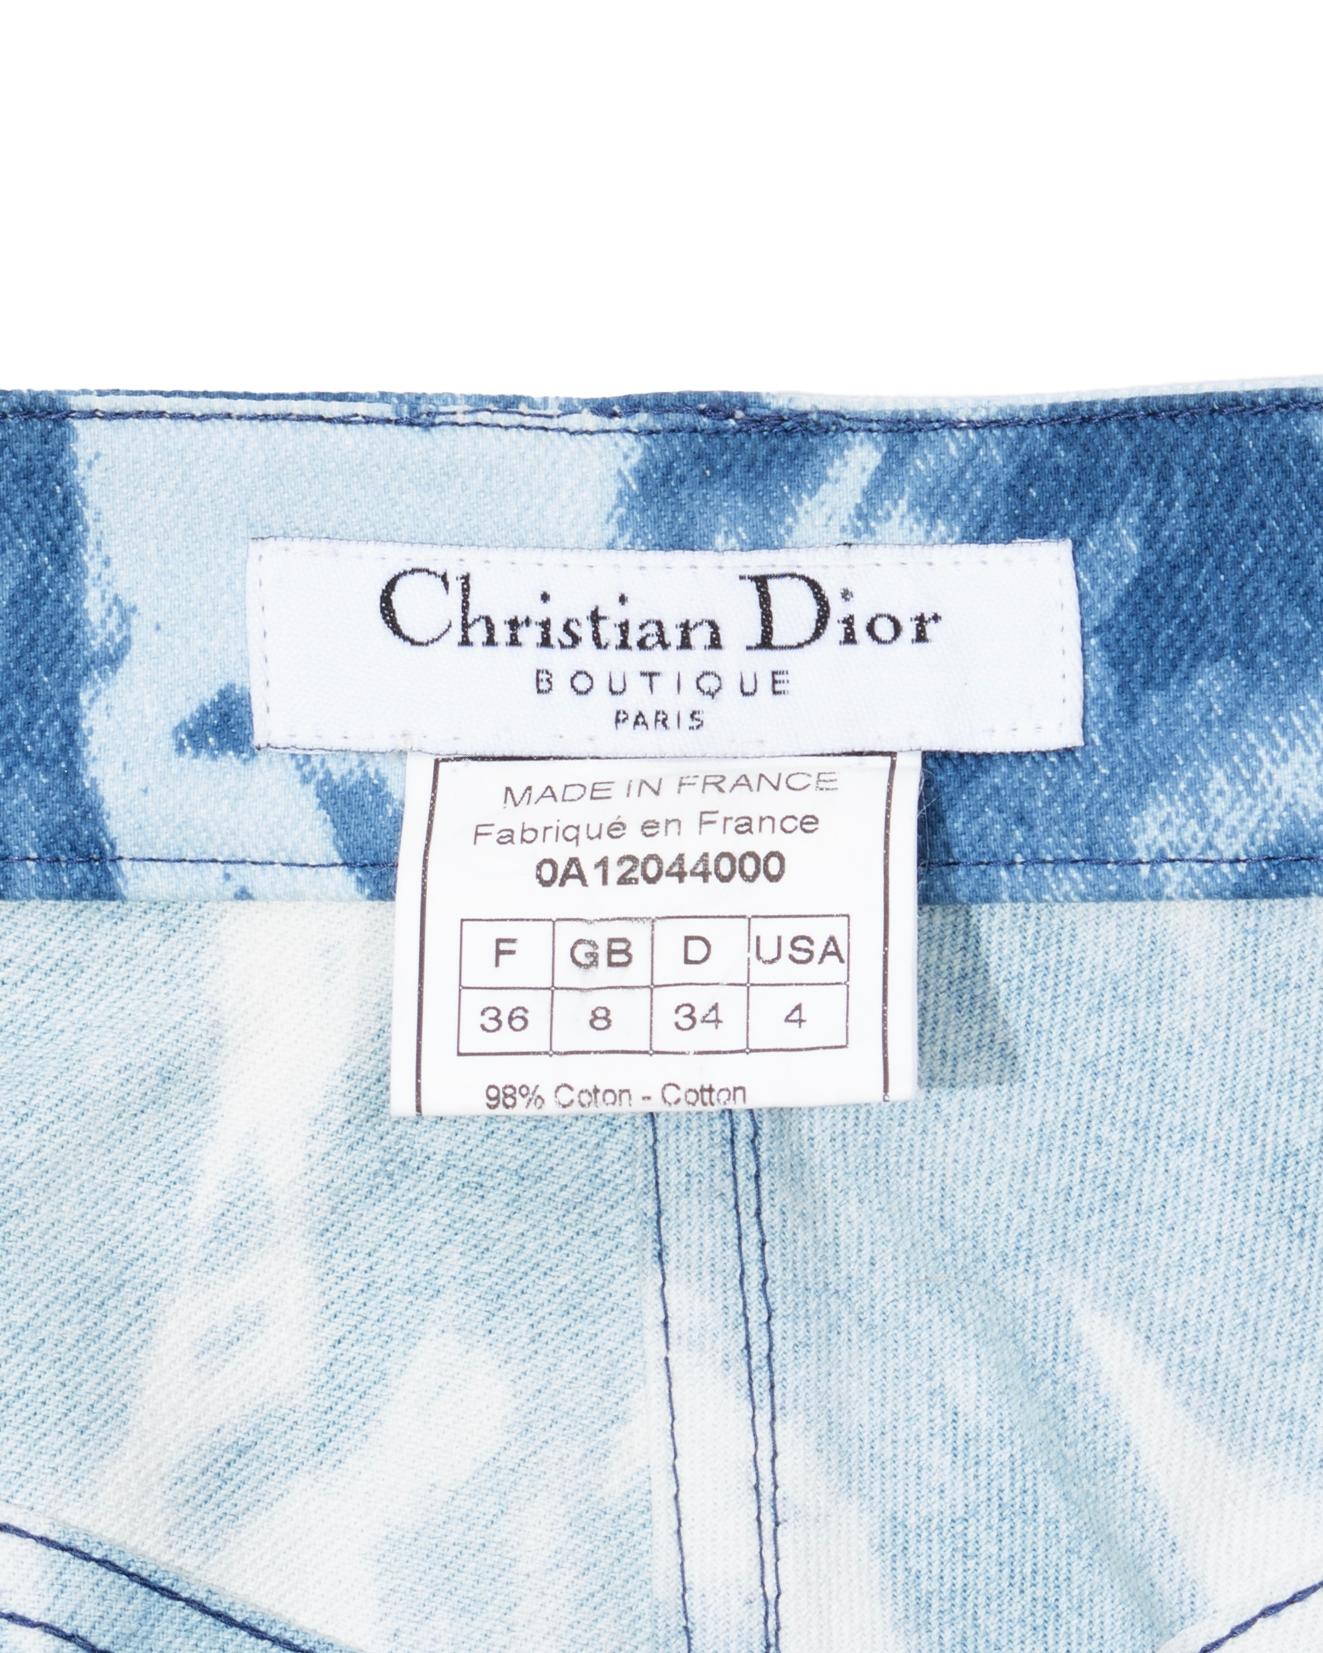 Christian Dior by John Galliano Bleached-Denim and Shearling Pants, fw 2000 For Sale 8